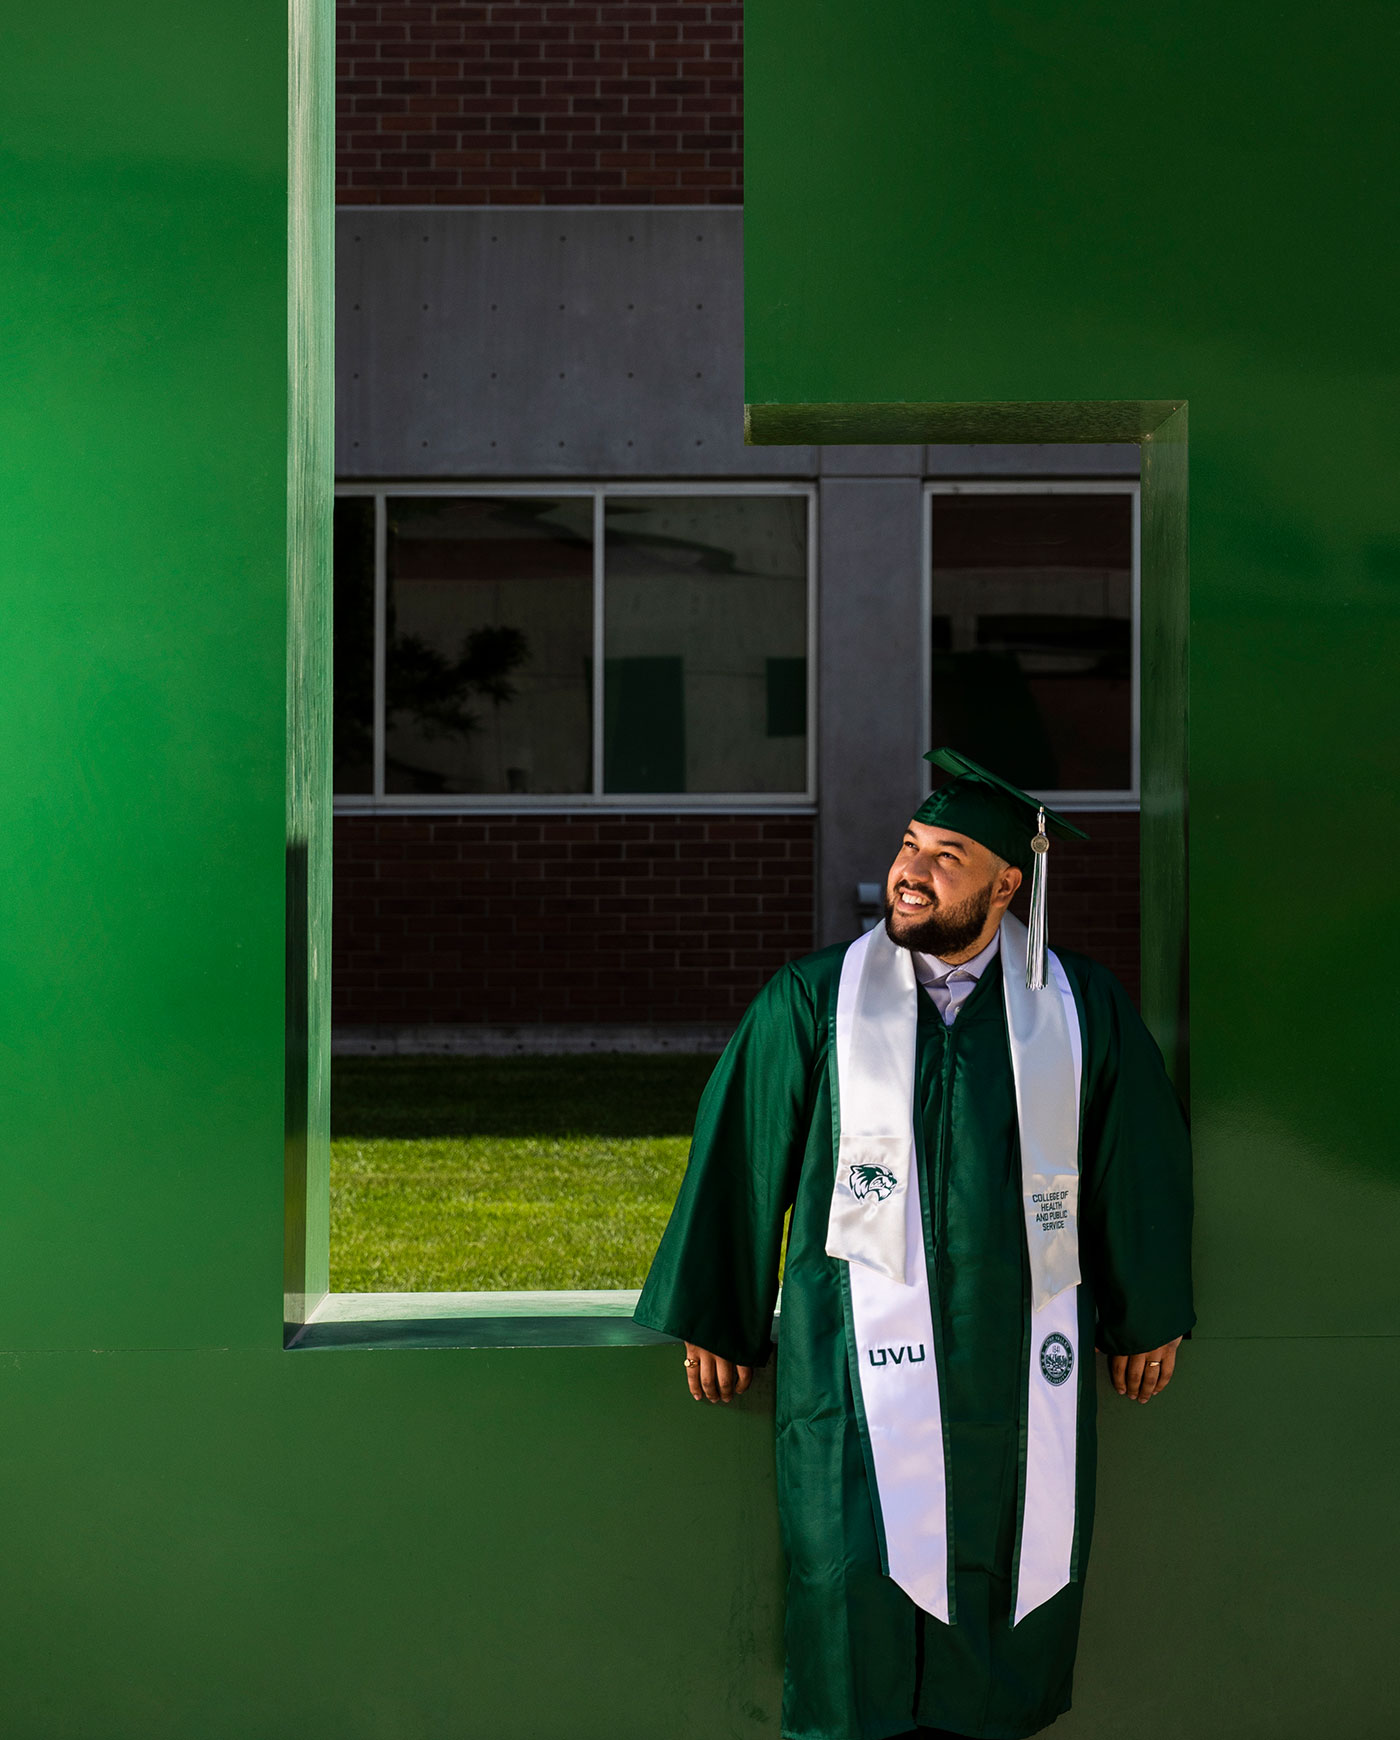 Graduate next to giant UVU letters